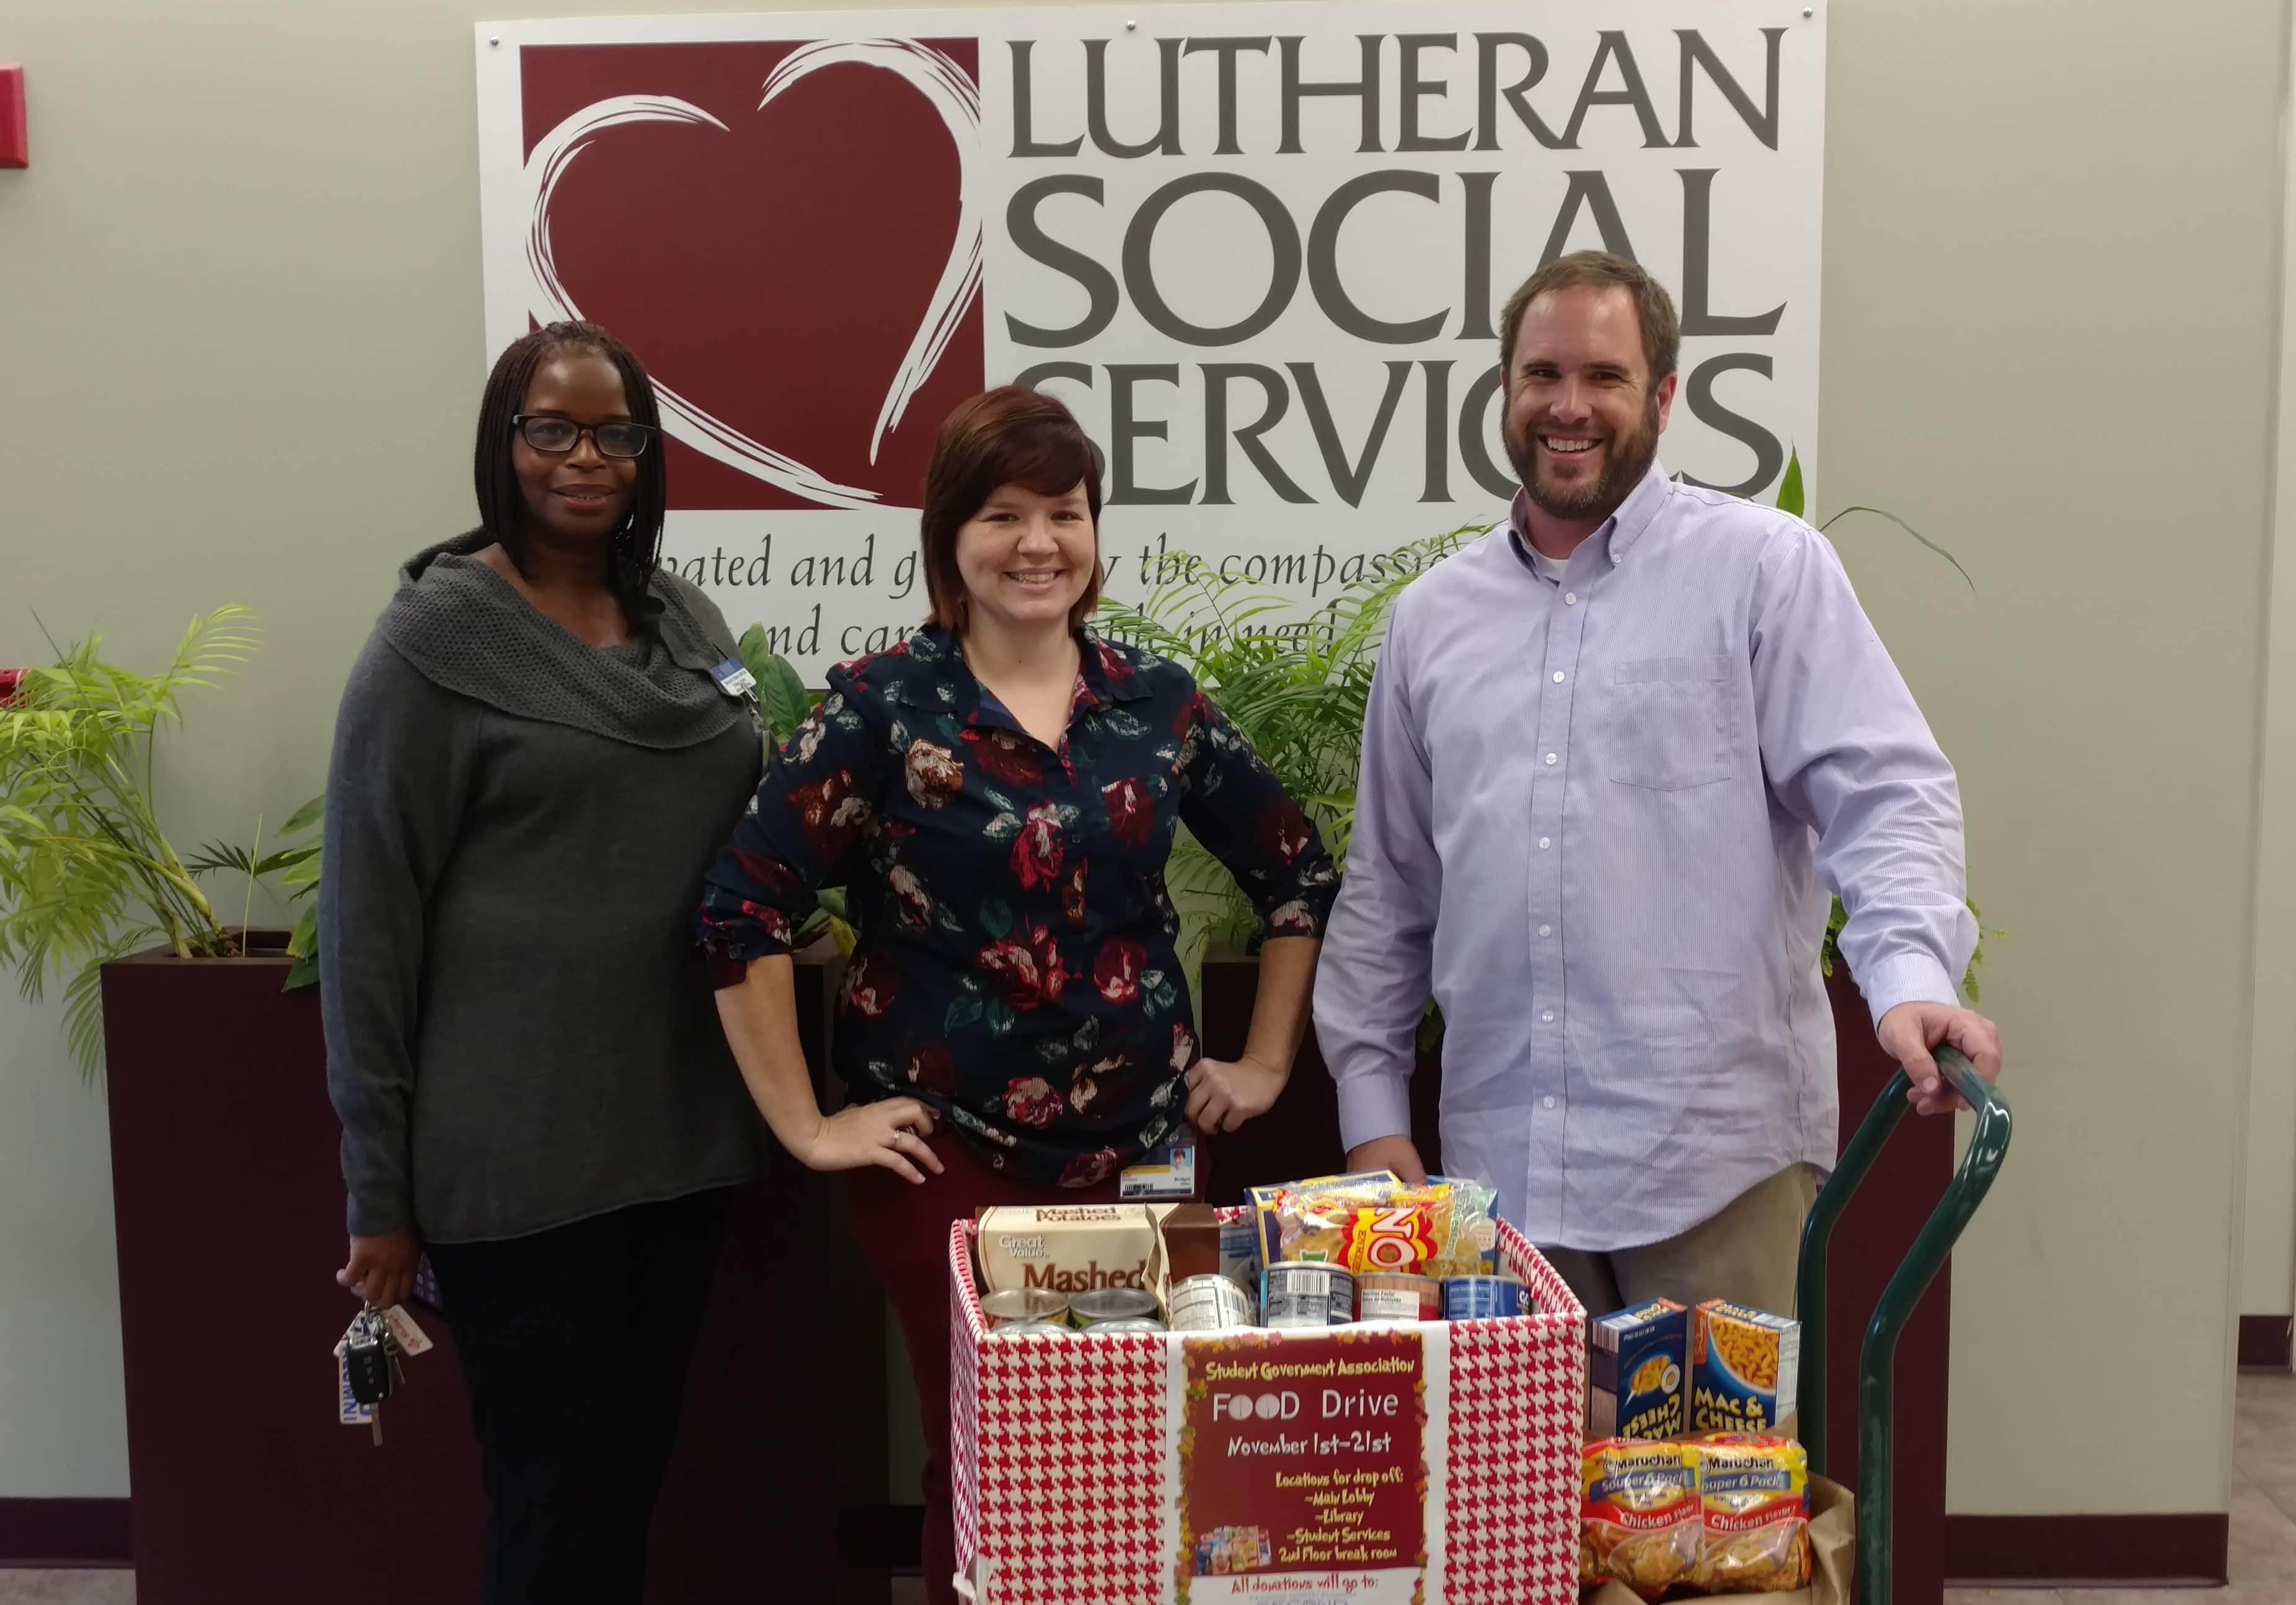 Student Government Donates to Luthern Social Services